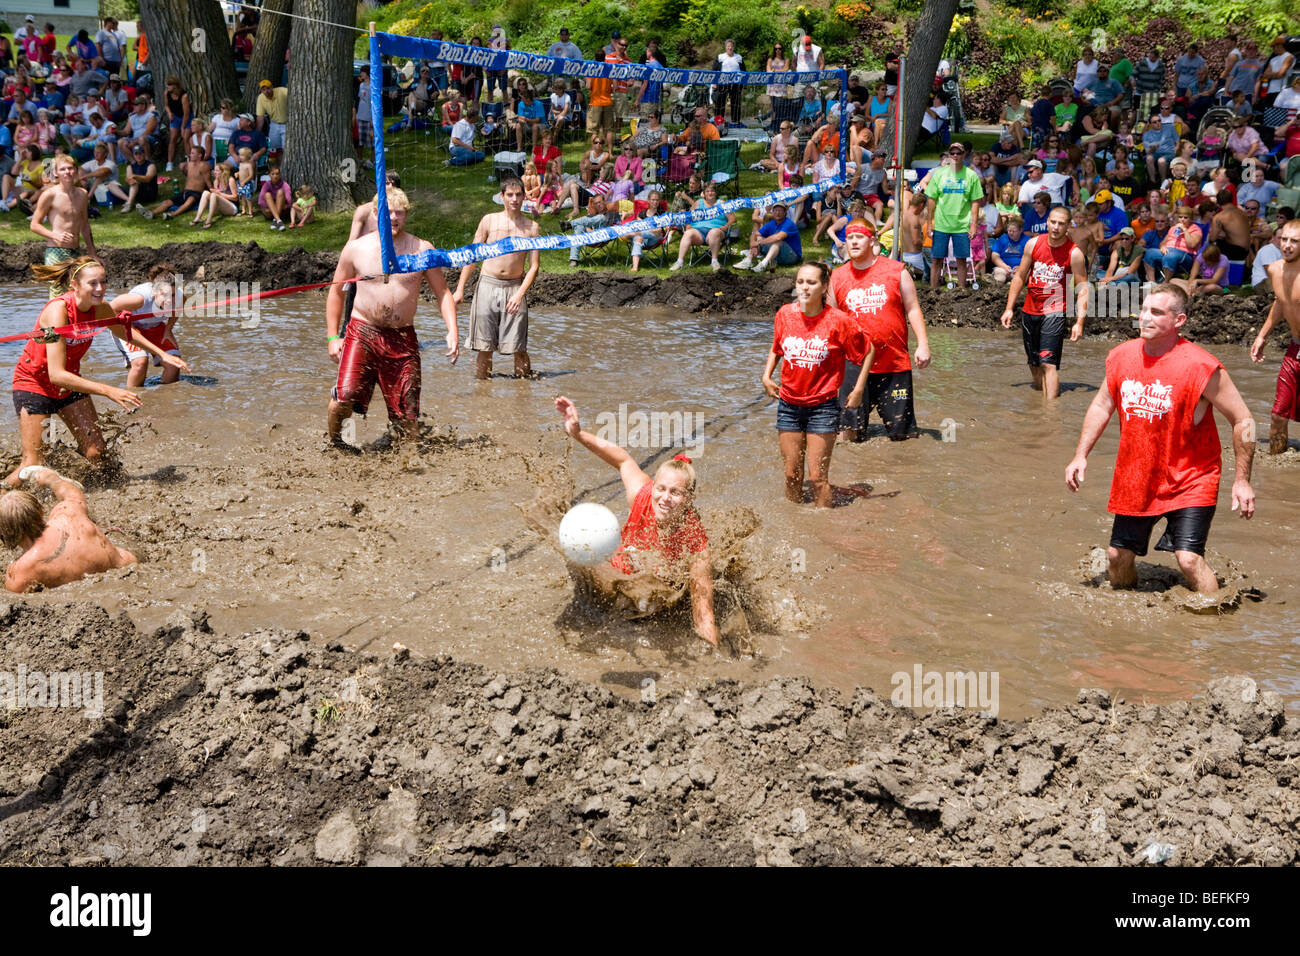 Mud volleyball game at a water festival in Lakeview, Iowa Stock Photo